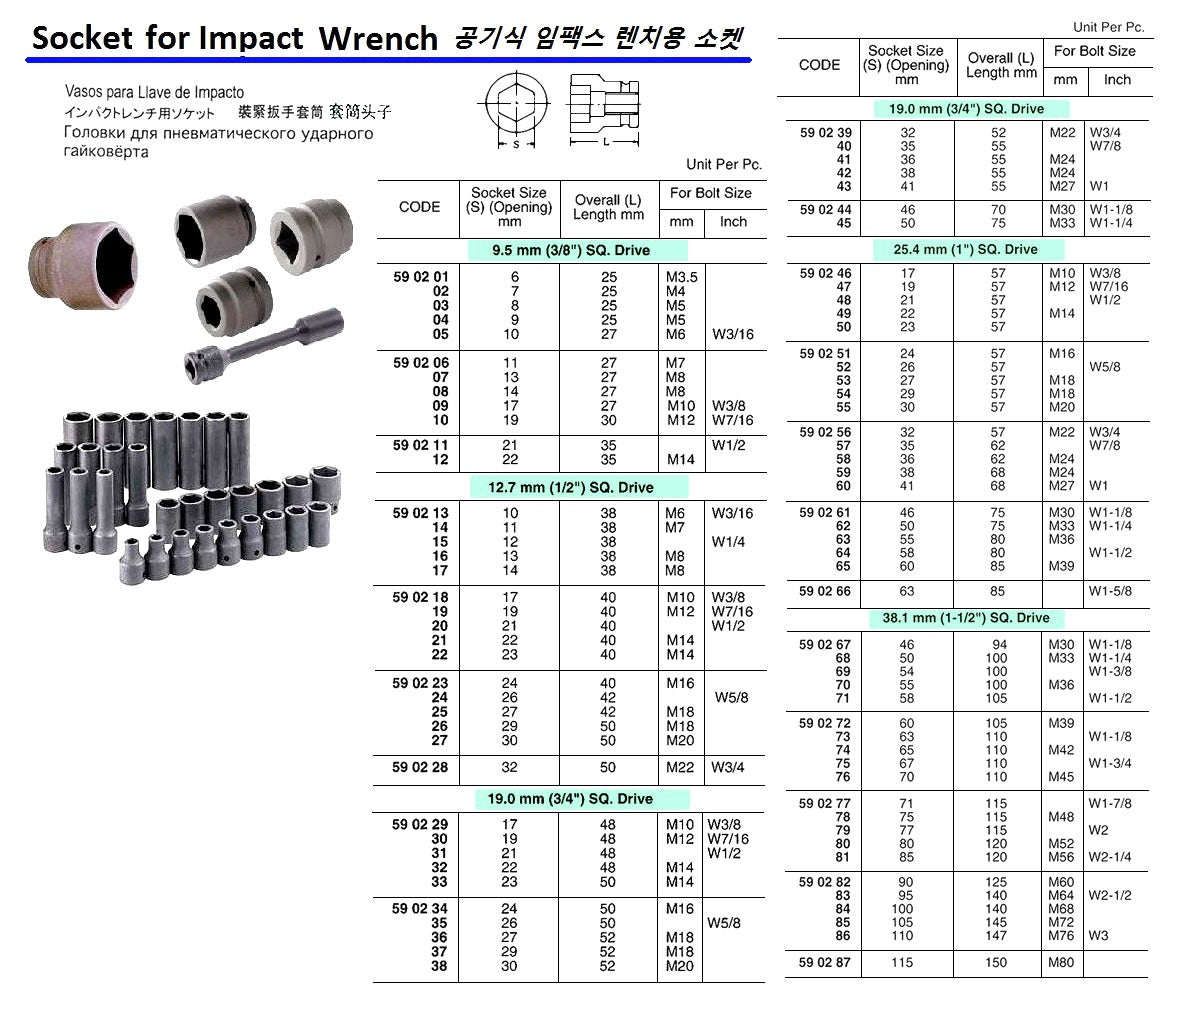 590201-SOCKET FOR IMPACT WRENCH, 9.5MM/SQ DR. X 6MM